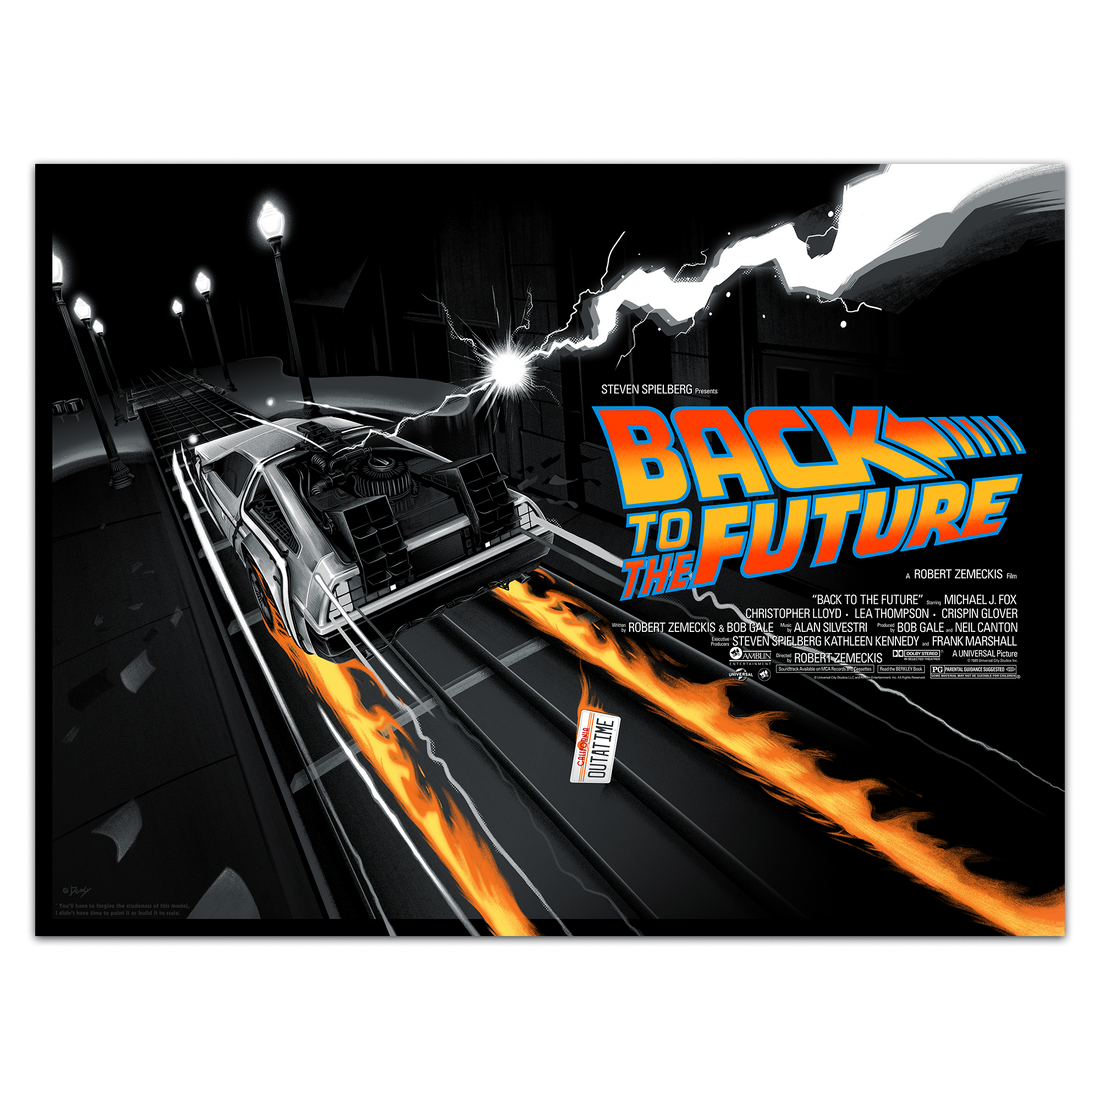 Back to the future variant poster by doaly